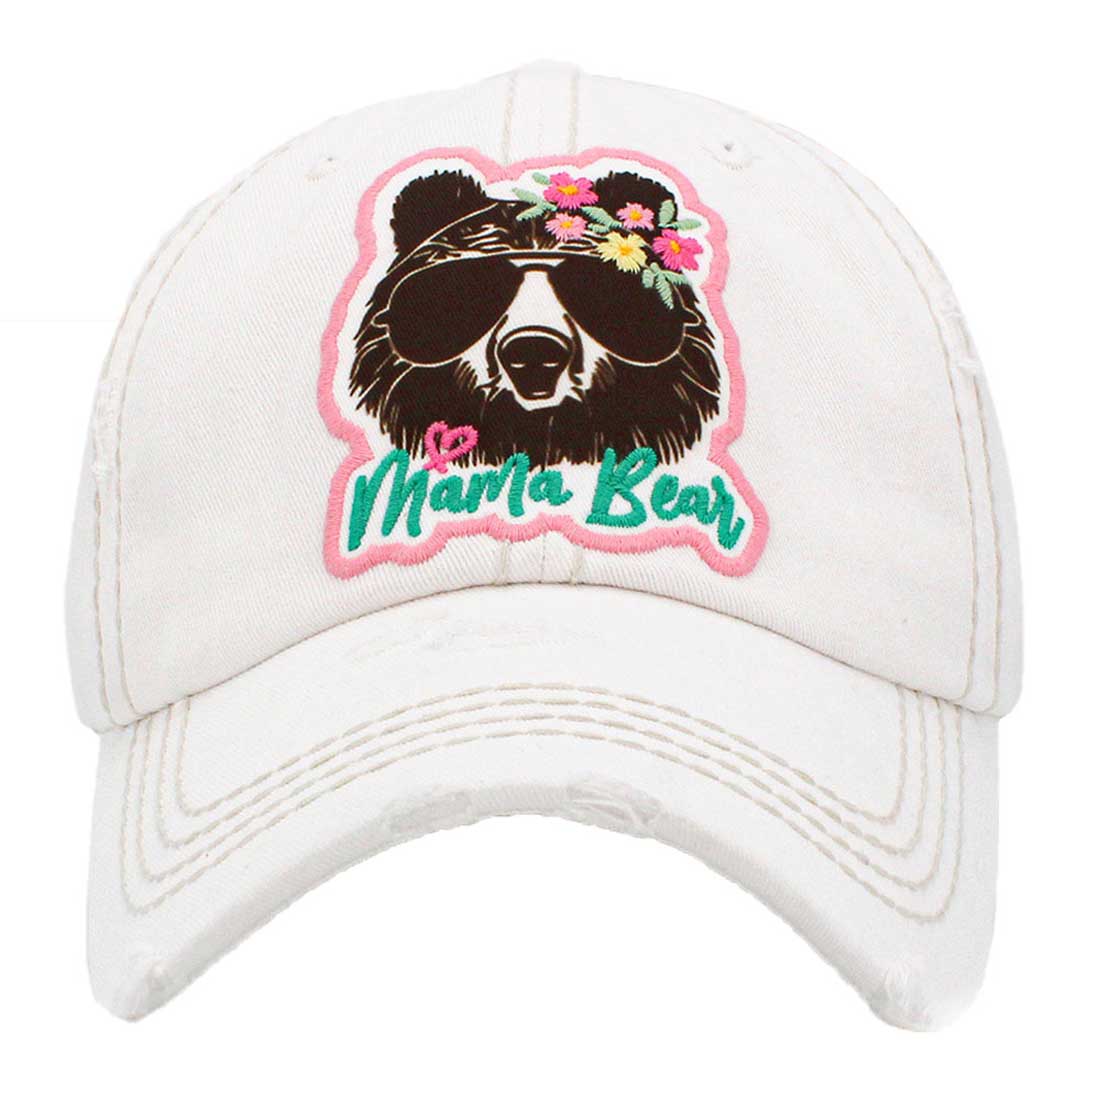 White Mama Bear Message Vintage Baseball Cap. Fun cool animal themed vintage cap. This peace Mama Bear embroidered baseball cap is made for you. It's fully adjustable and easy to style! Perfect to keep your hair away from you face while exercising, running, playing tennis or just taking a walk outside. Adjustable Velcro strap gives you the perfect fit.